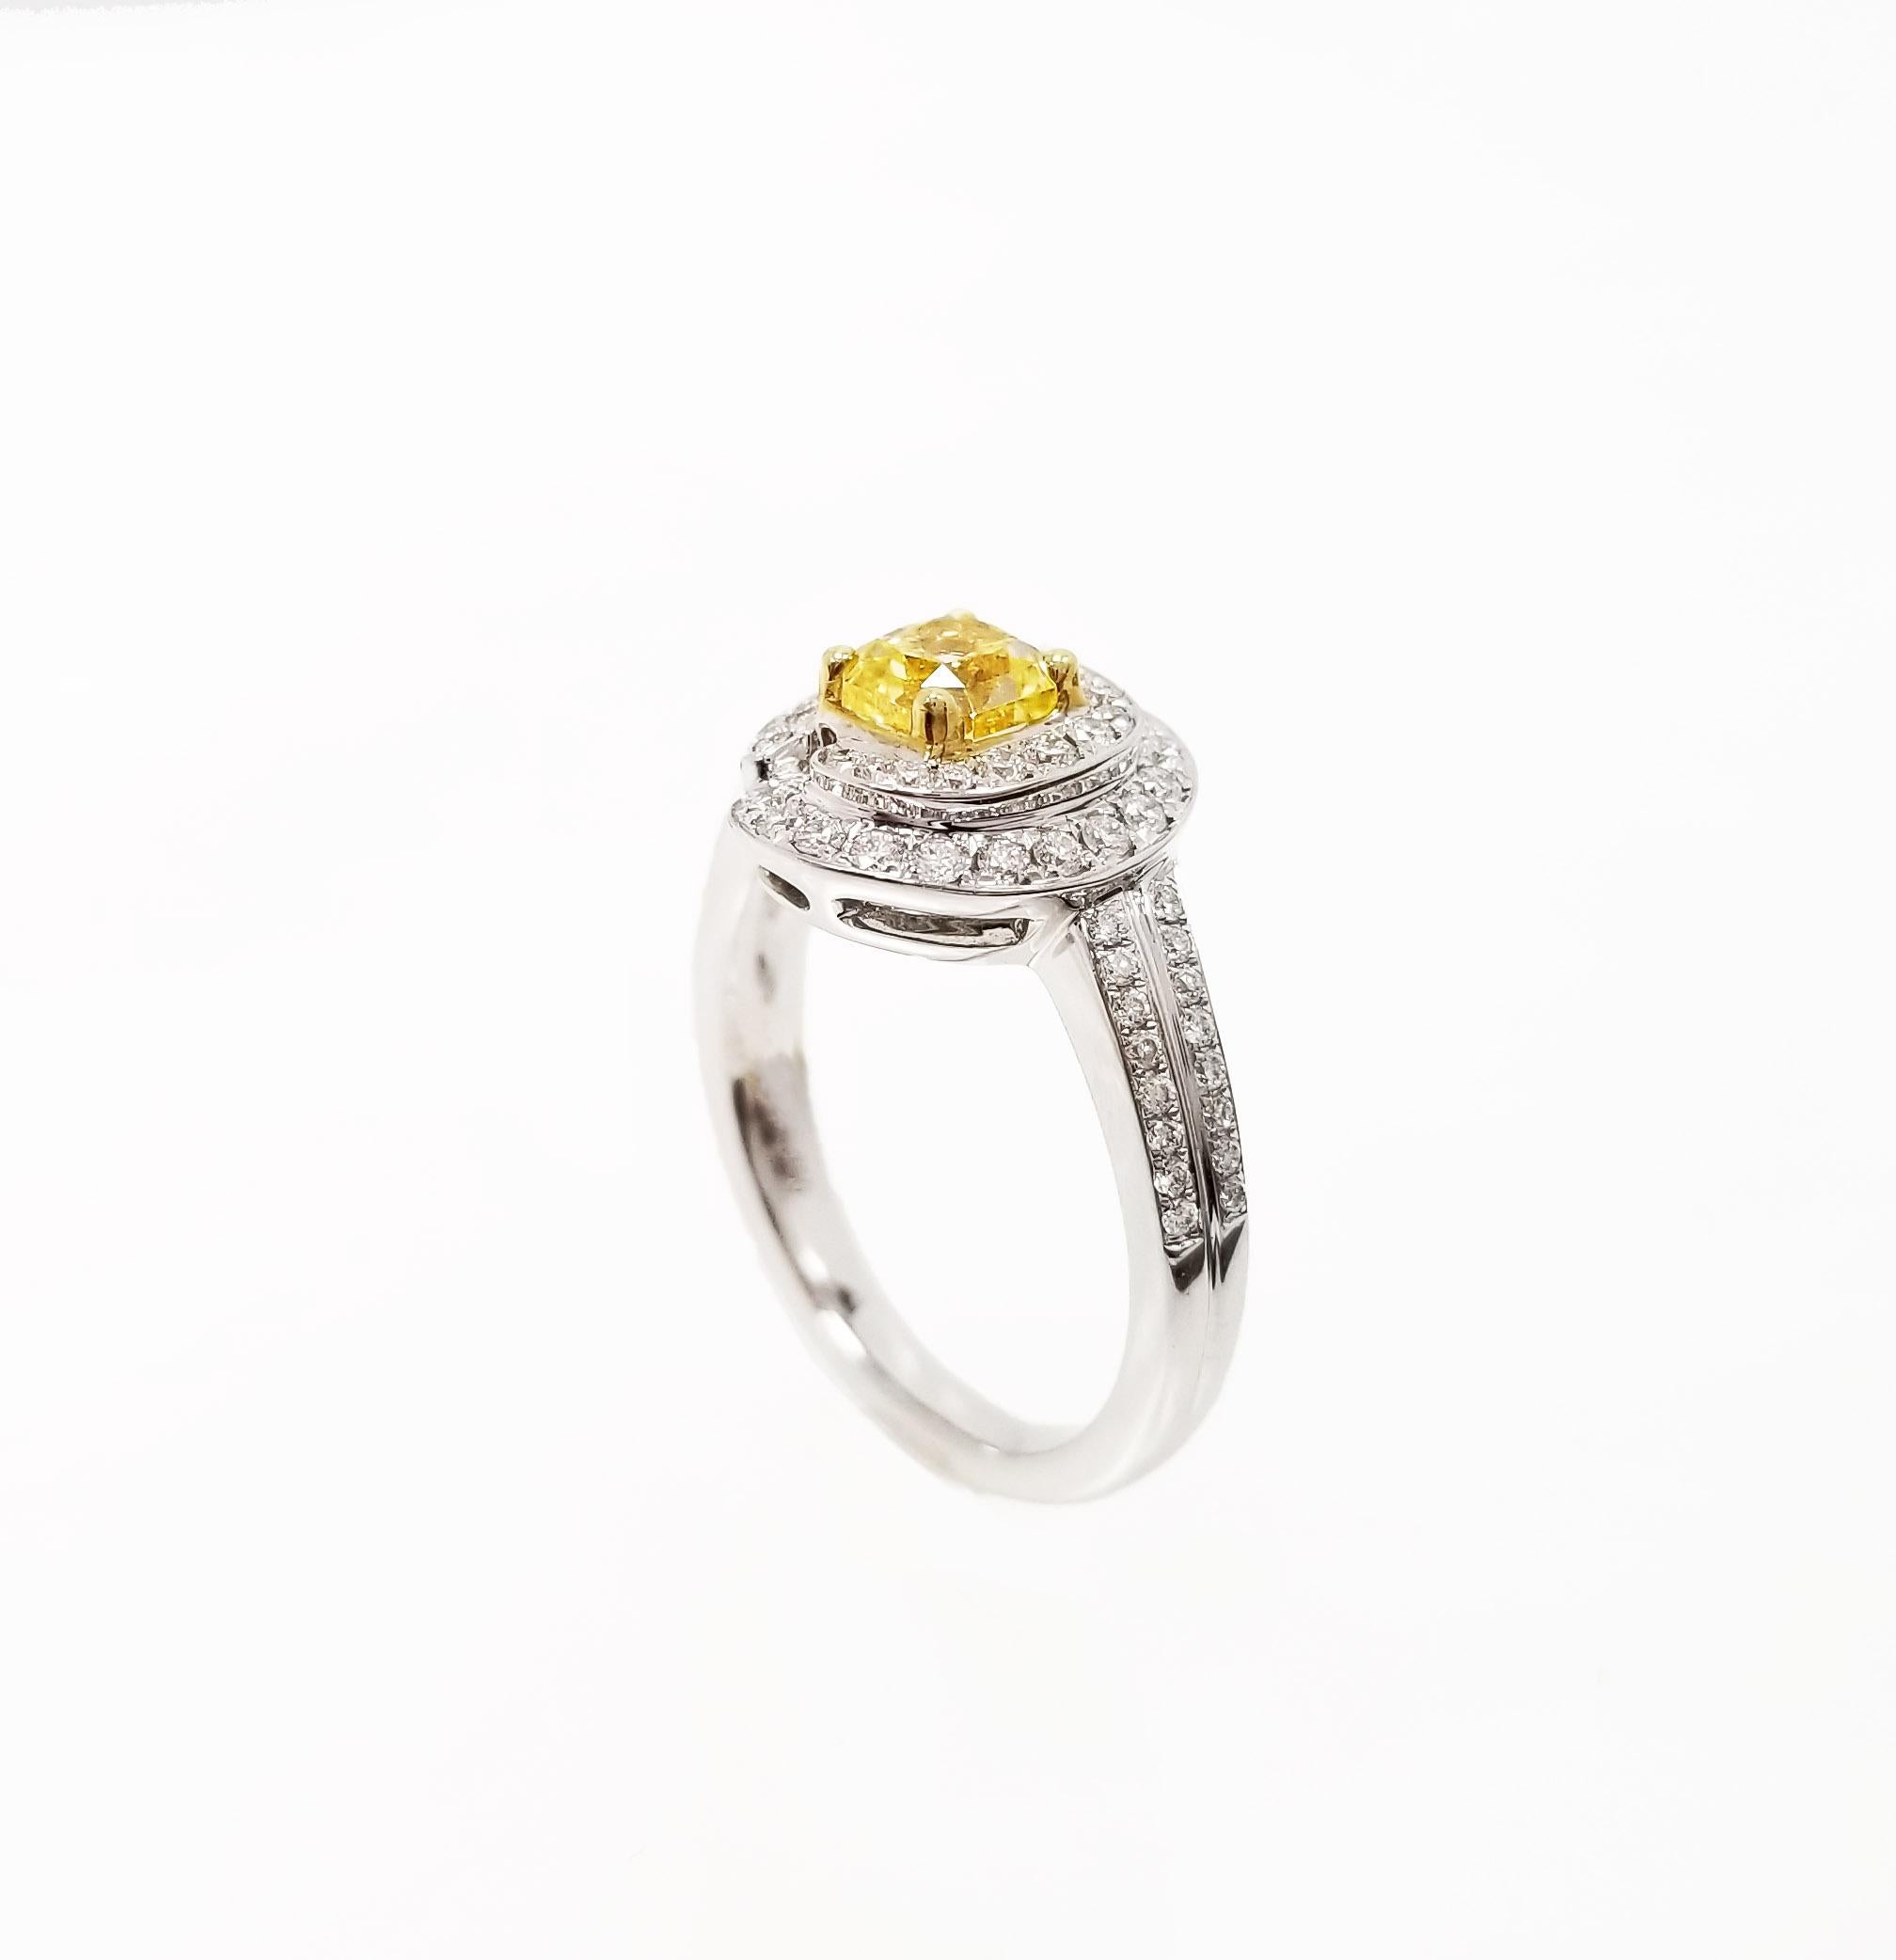 Contemporary Scarselli GIA-Certified 1 Carat Fancy Yellow Natural Diamond 18k Engagement Ring For Sale